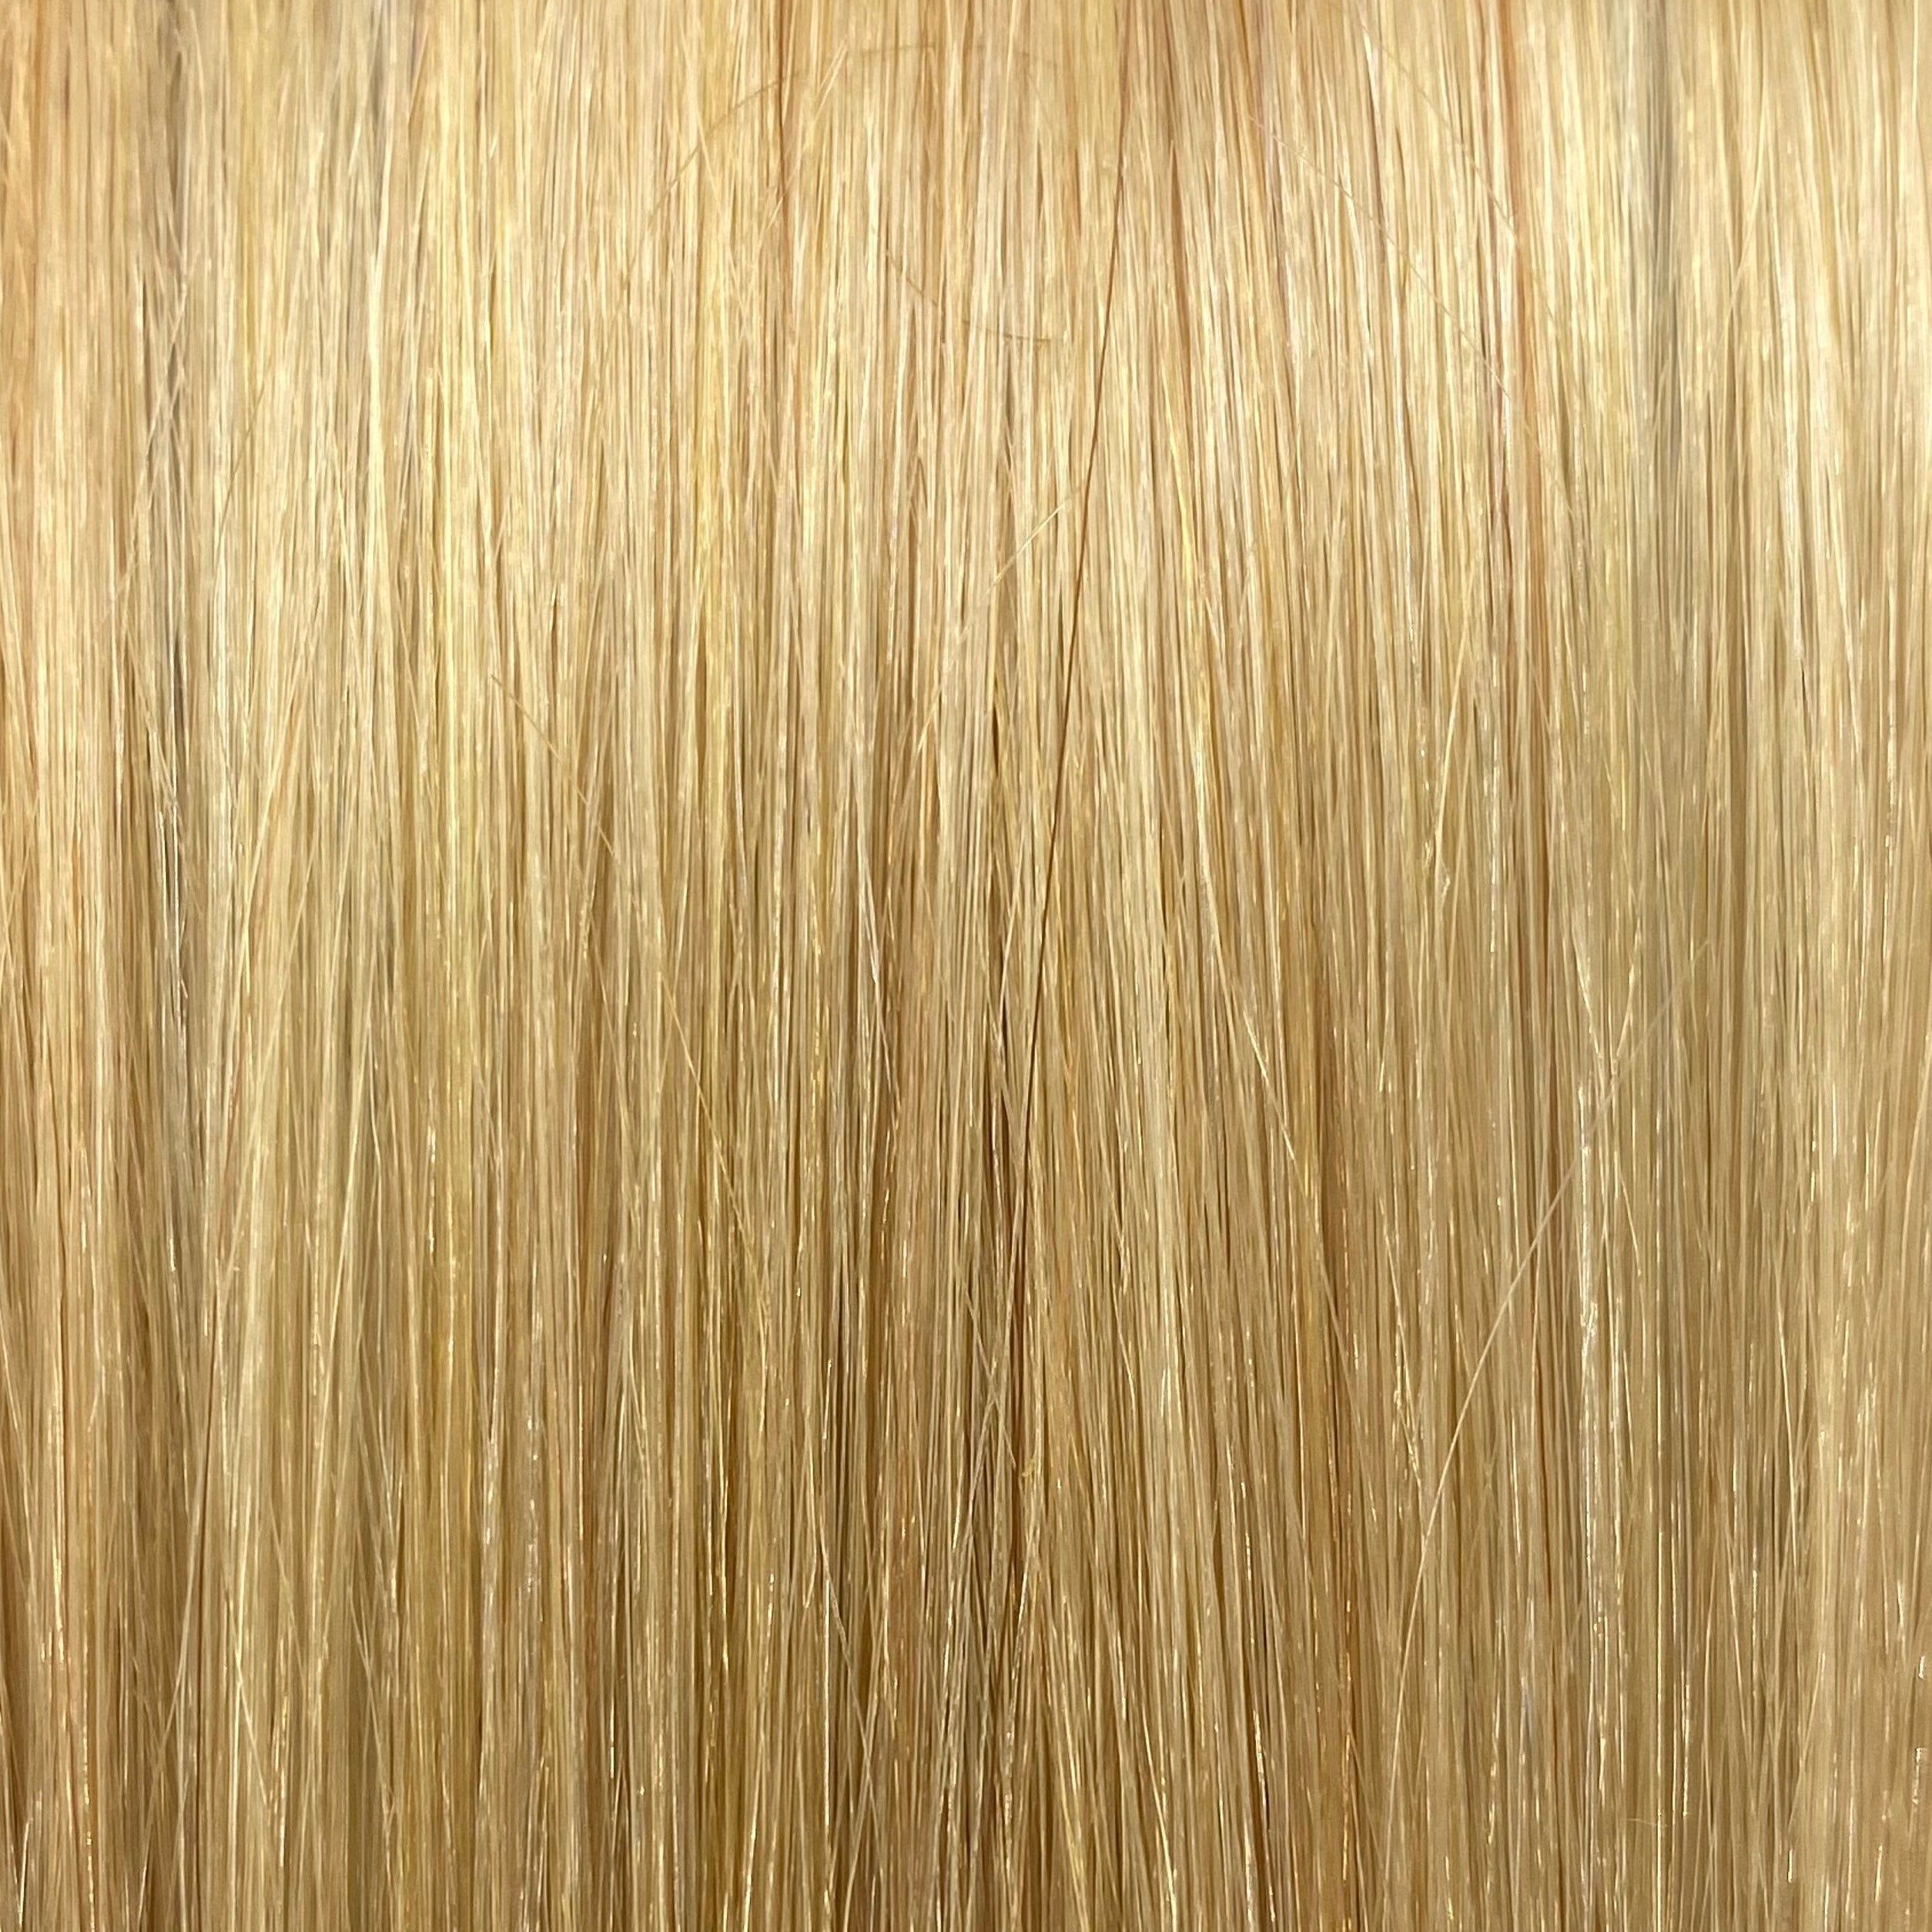 FUSION #DB2 LIGHT GOLDEN BLONDE 40CM/ 16 INCHES  -  17.5 GRAMS - Image 1